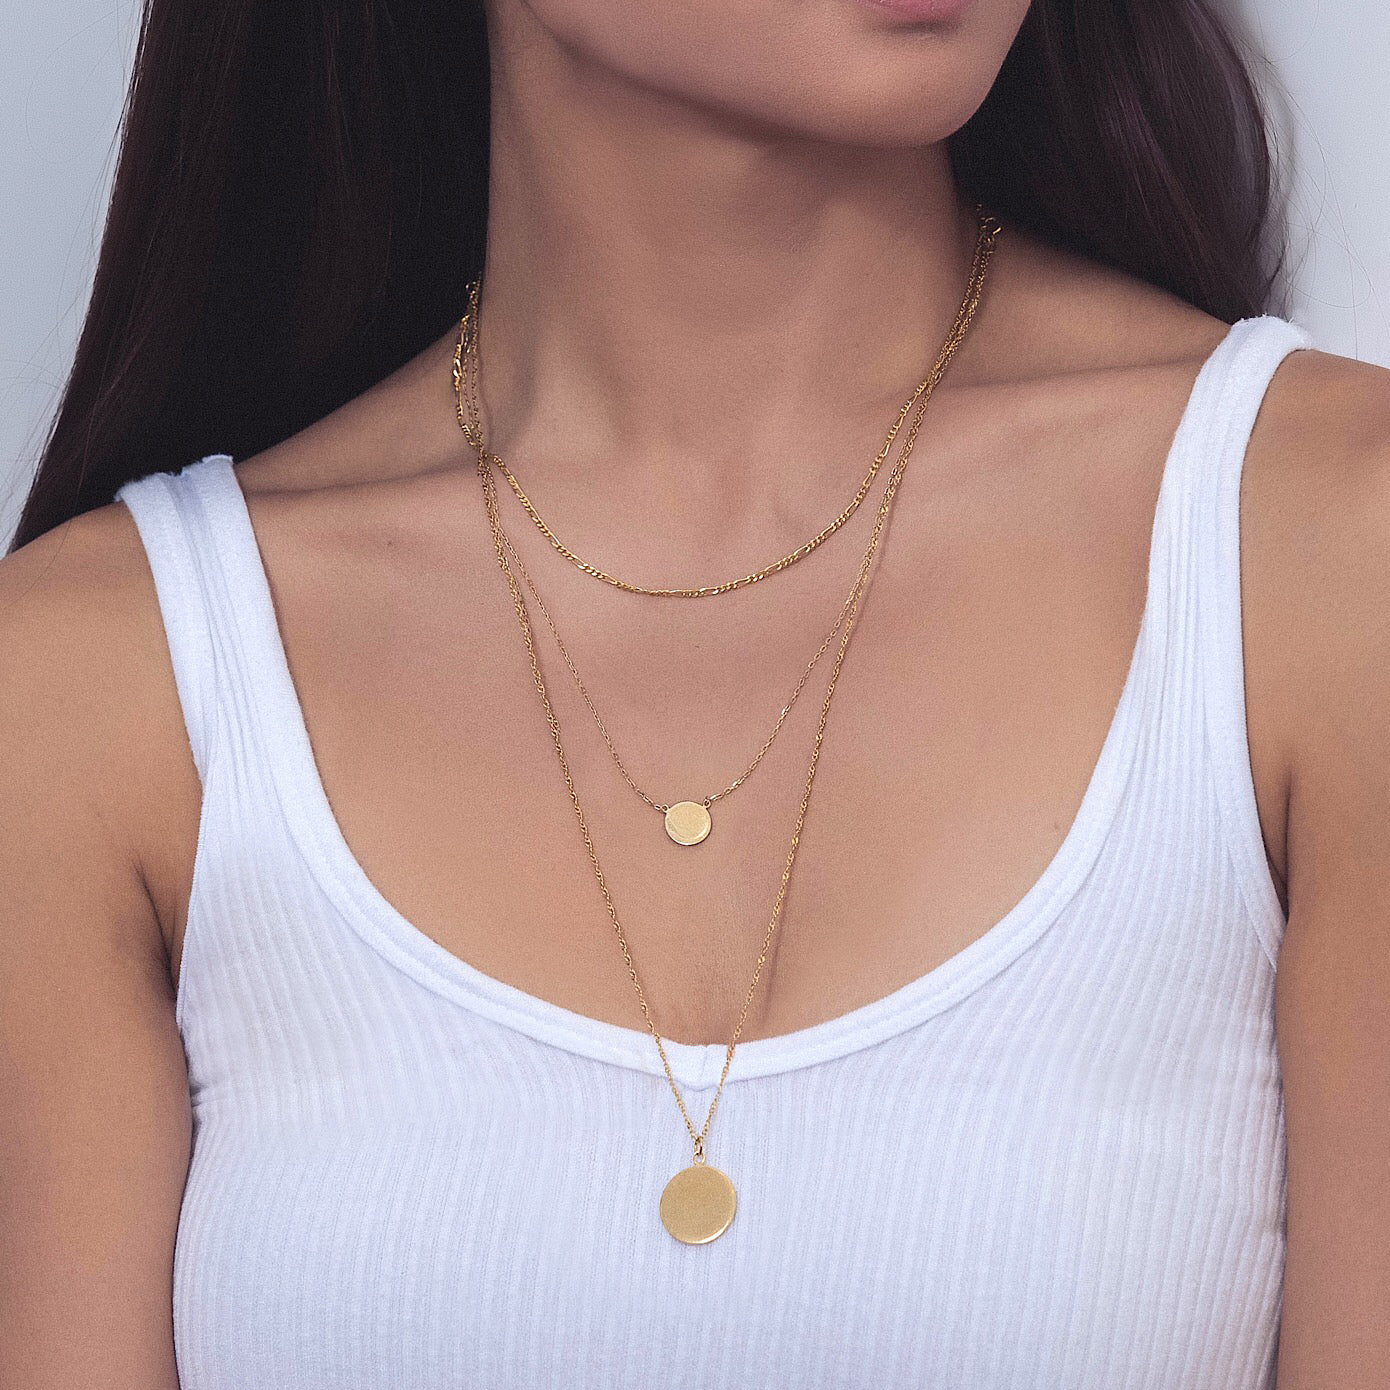 3 Layer Necklace, Layered Necklace Set, Gold Disc Necklace, Gold Necklace, Thick Chain Necklace, Gold Layering Necklace, Pendant Necklace